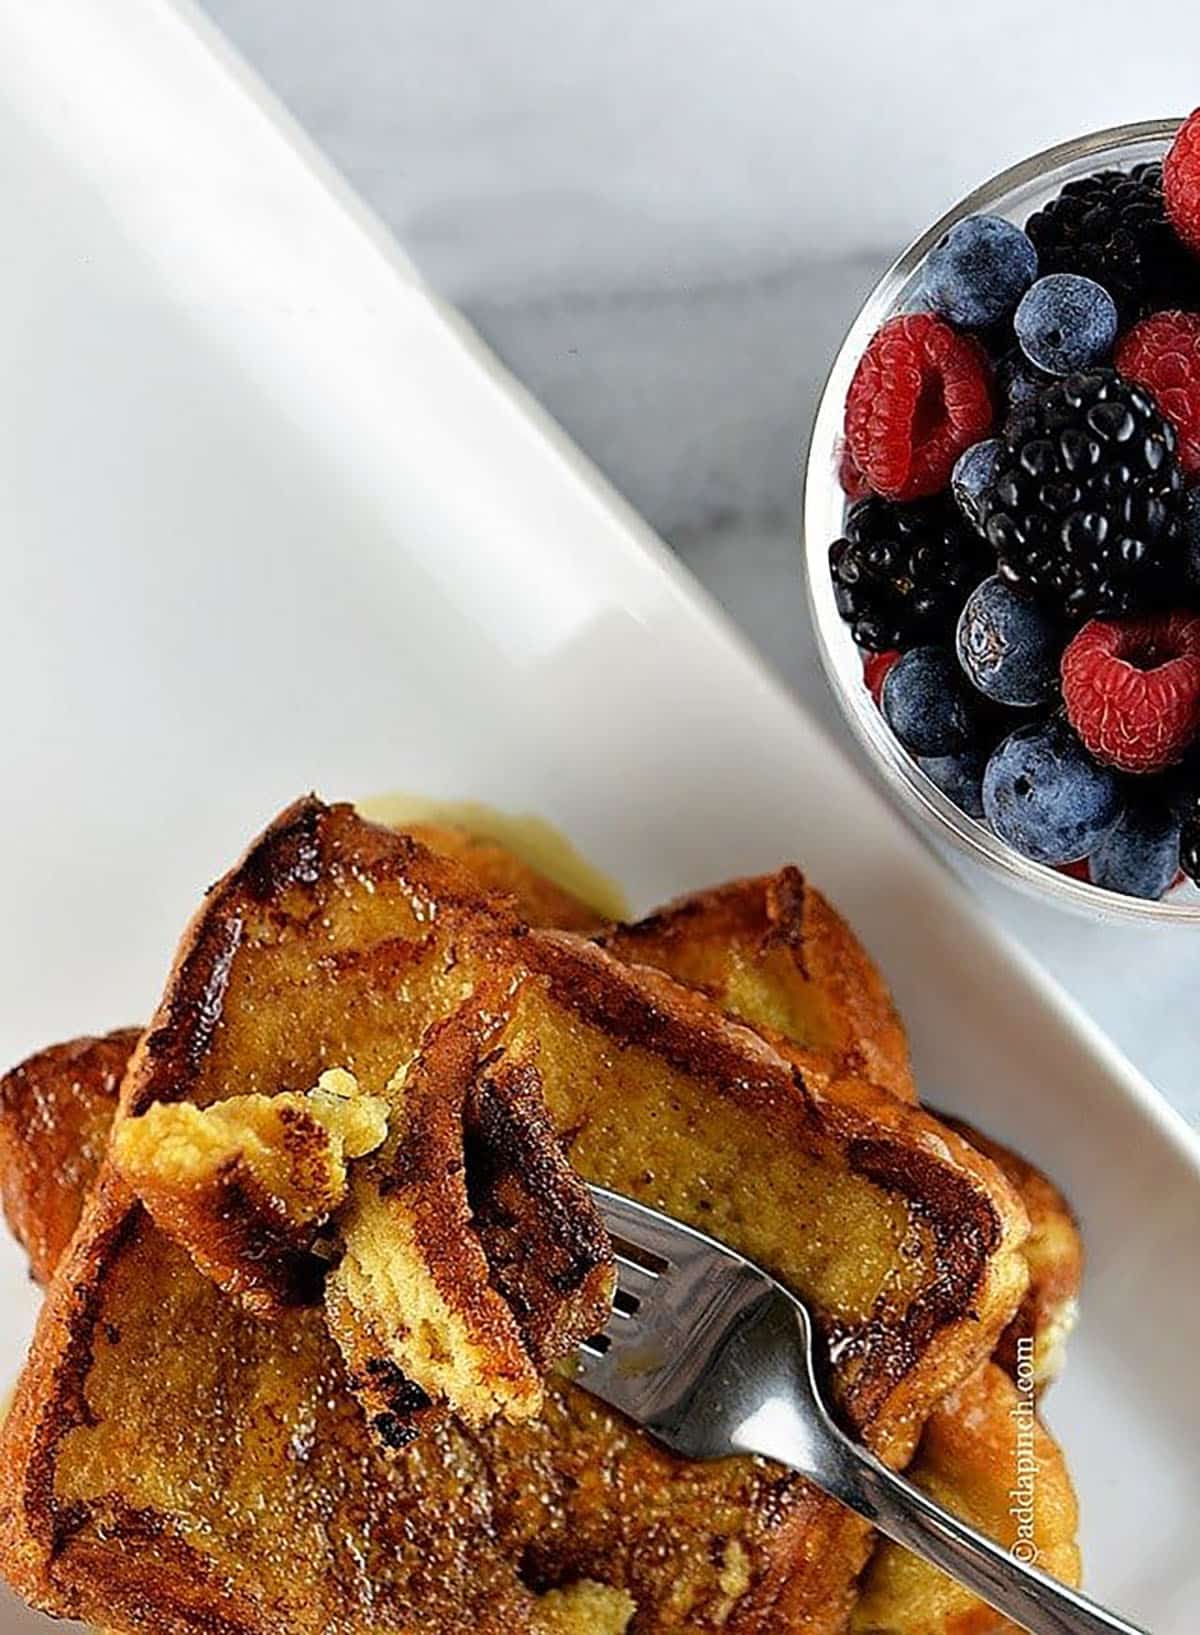 Overhead photo of plate of French toast and a glass bowl on the side with fresh berries.